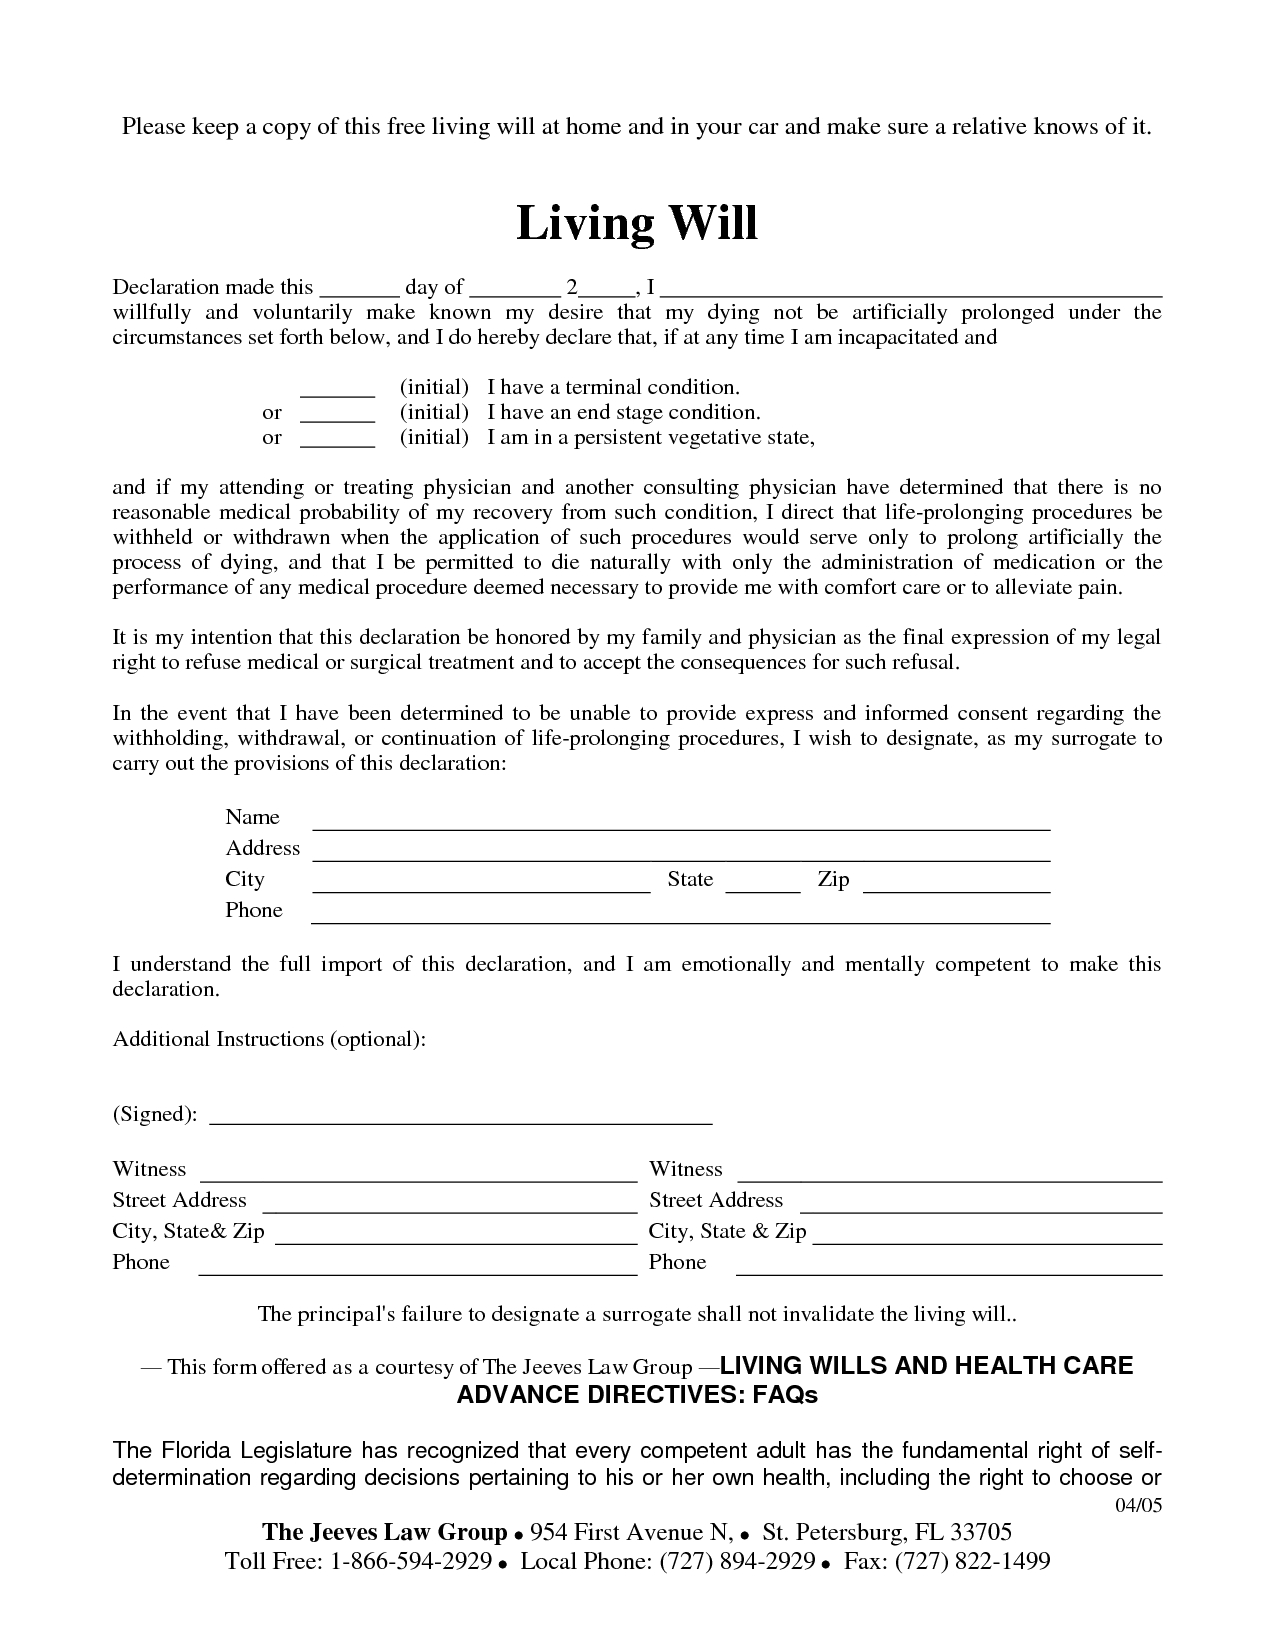 Free Copy Of Living Willrichard_Cataman - Living Will Sample - Living Will Forms Free Printable